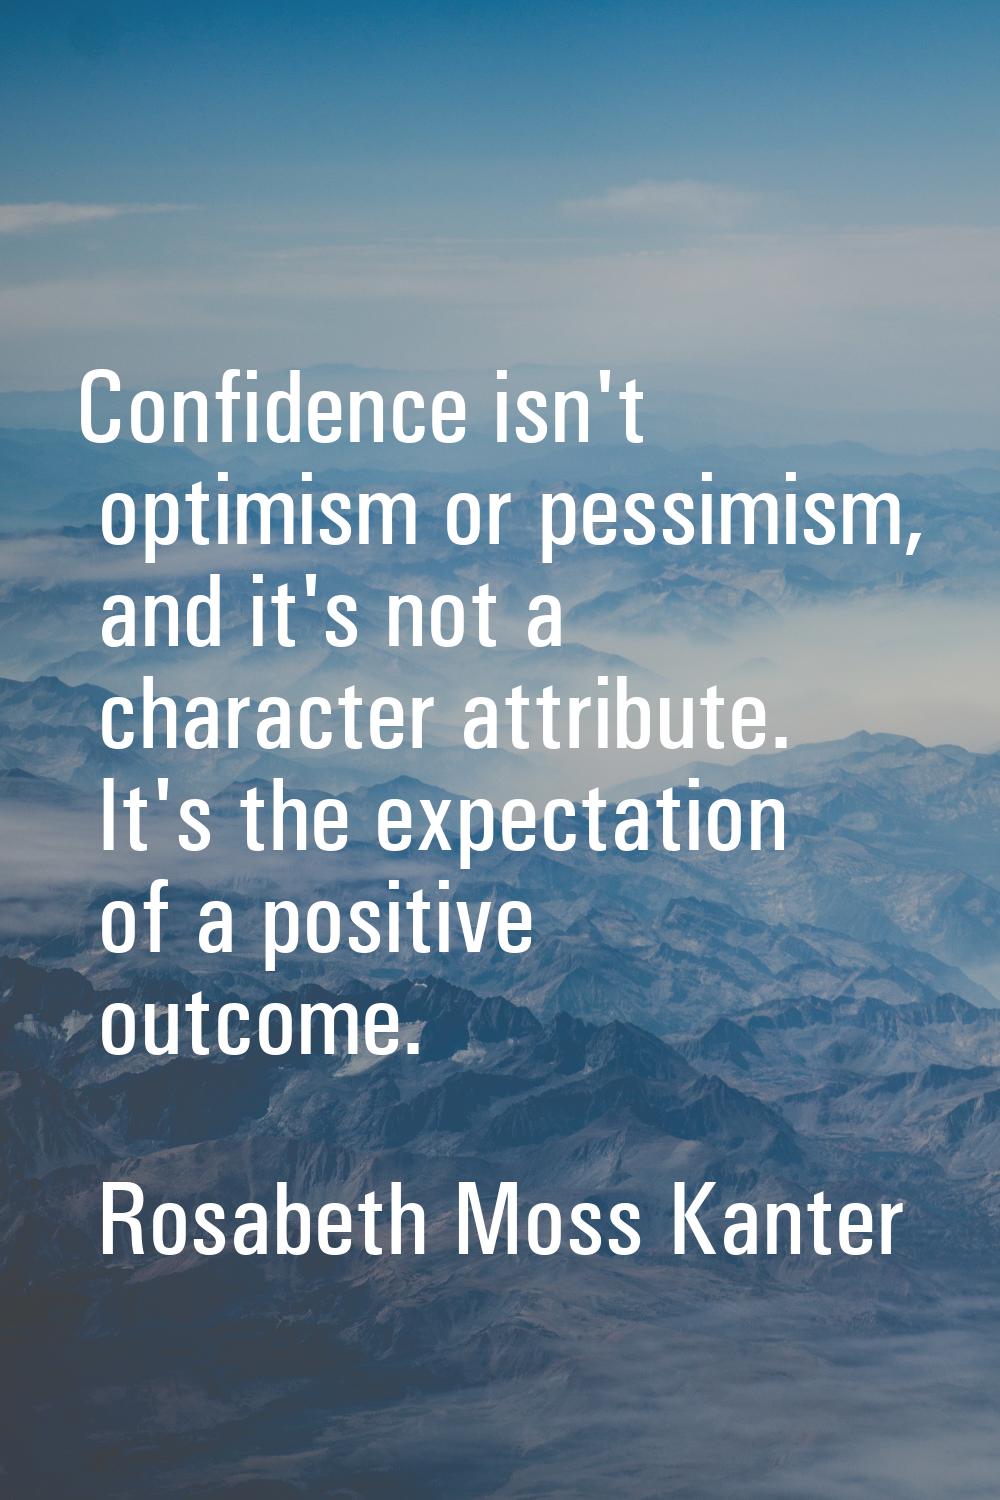 Confidence isn't optimism or pessimism, and it's not a character attribute. It's the expectation of